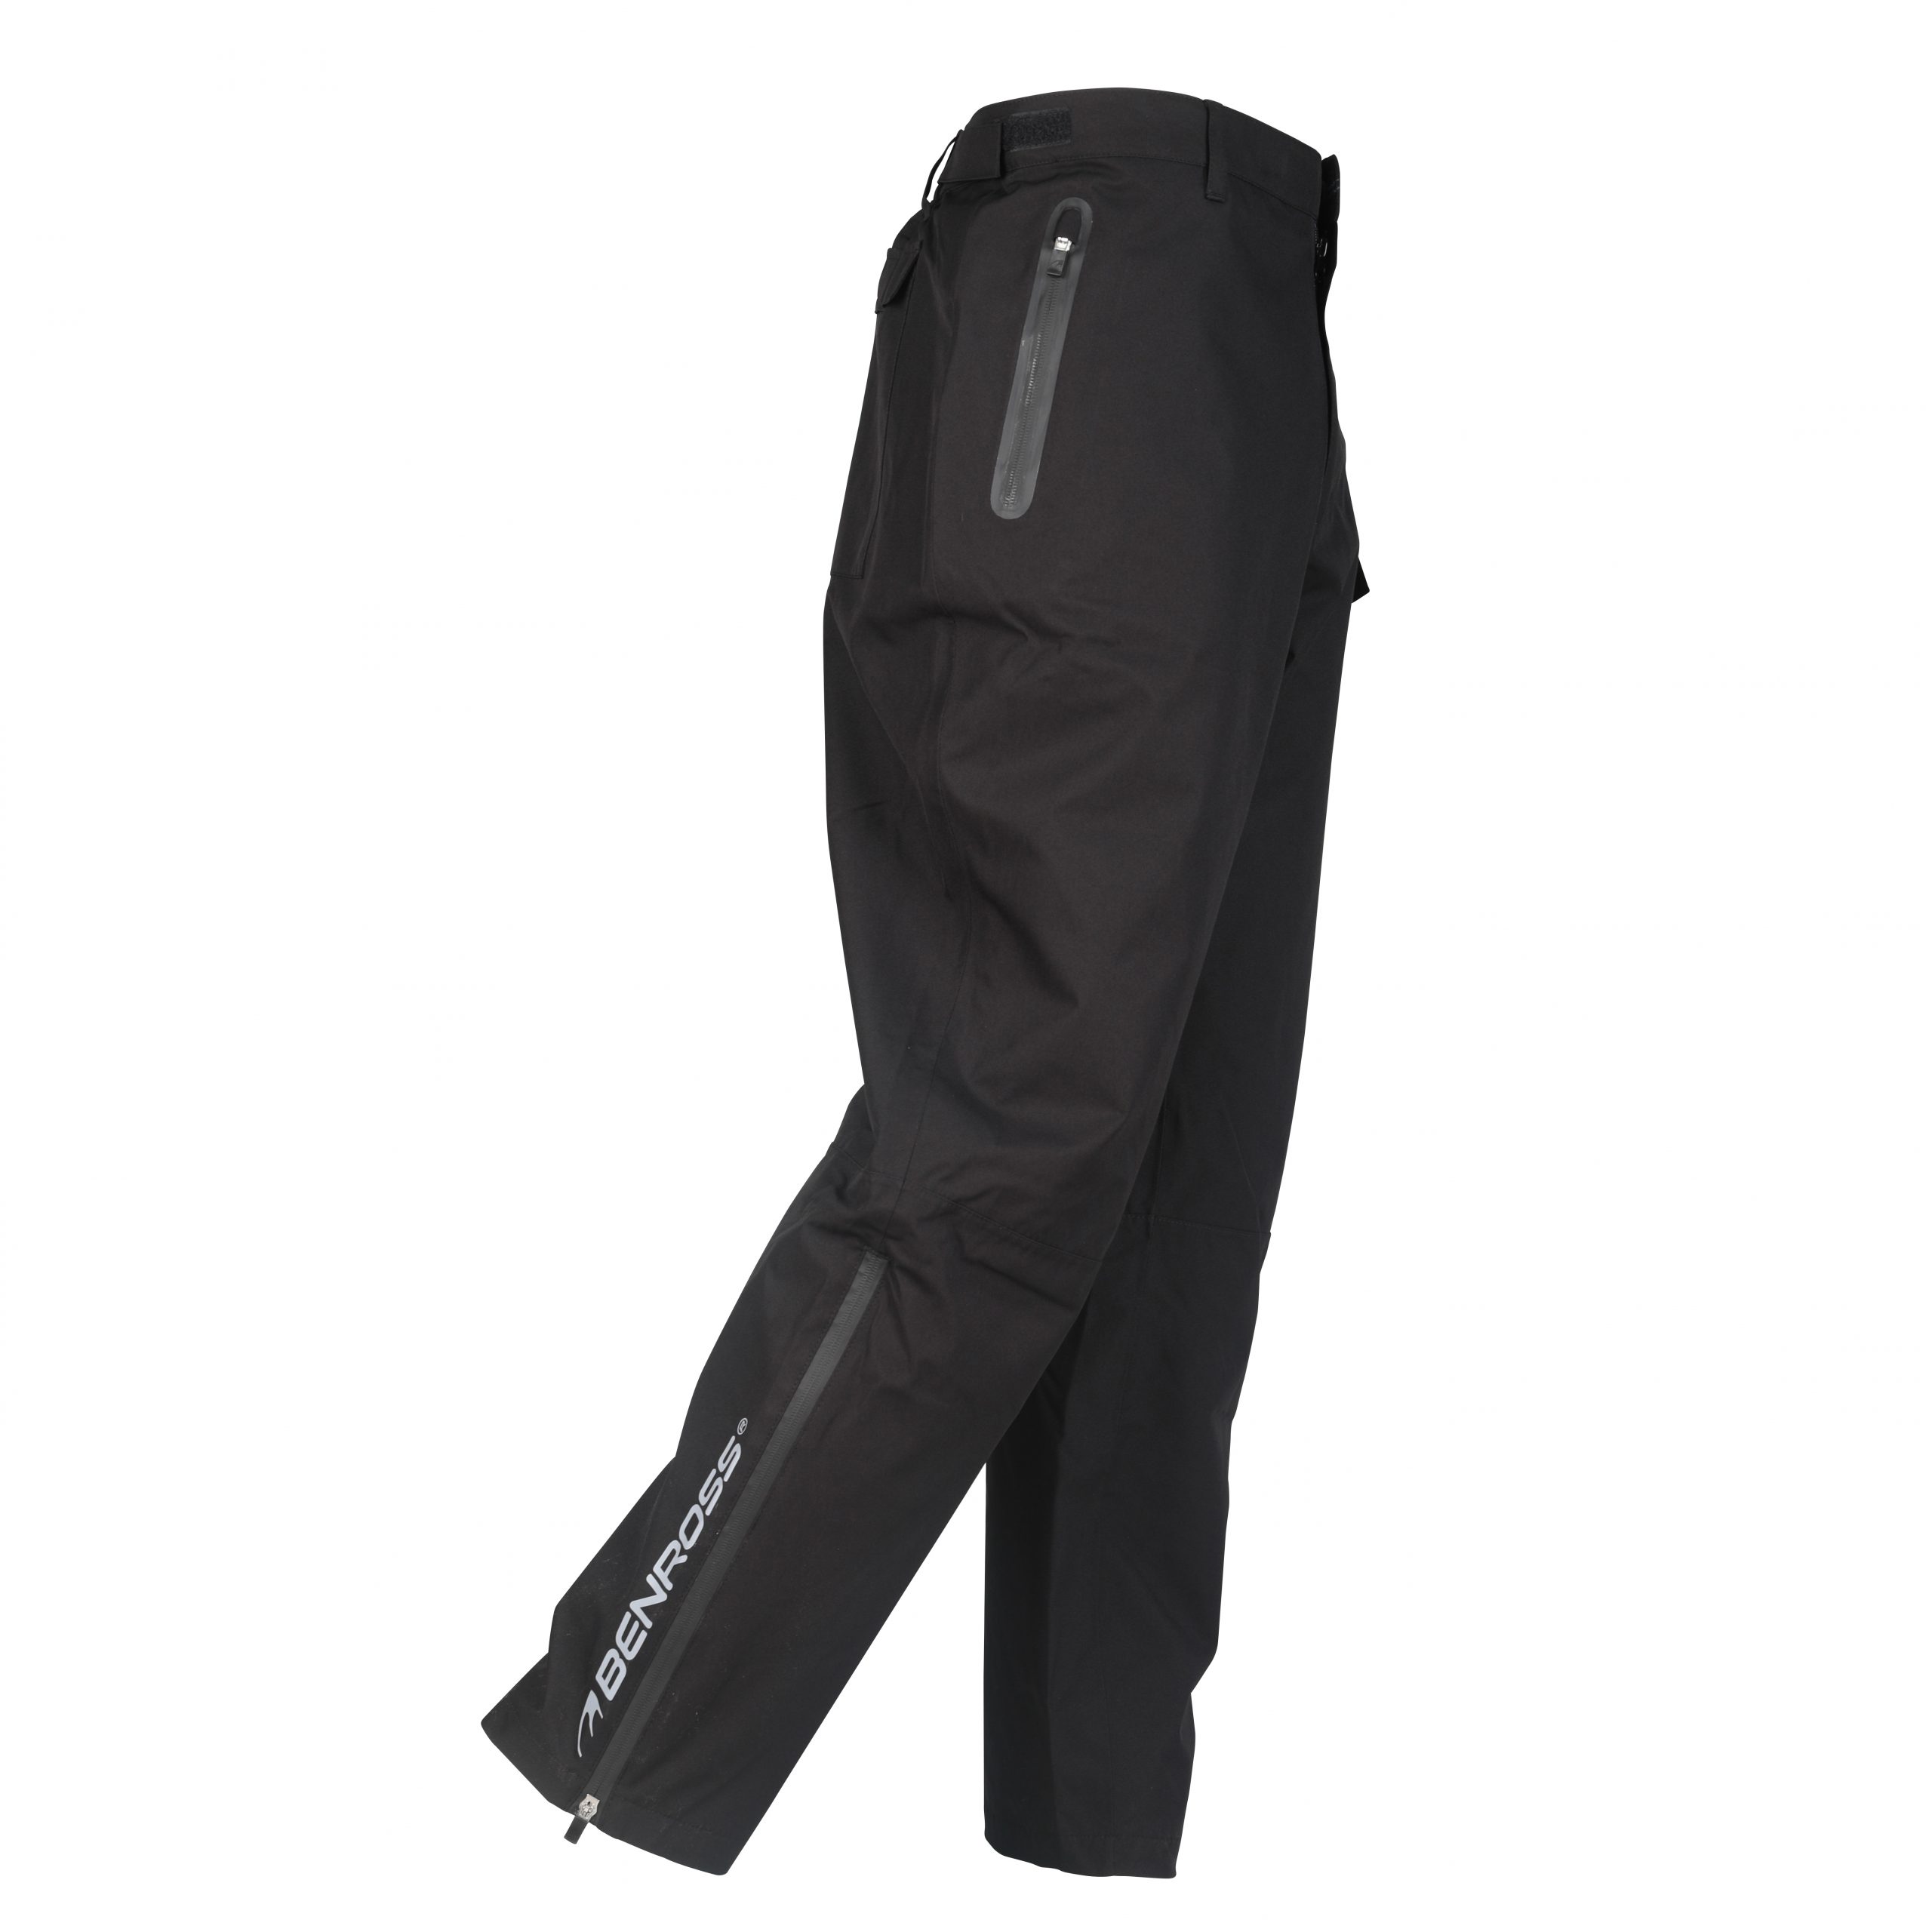 Blaklader Waterproof Softshell Knee Pad Work Trousers with Nail Pockets  1500 2517 Trousers ActiveWorkwear